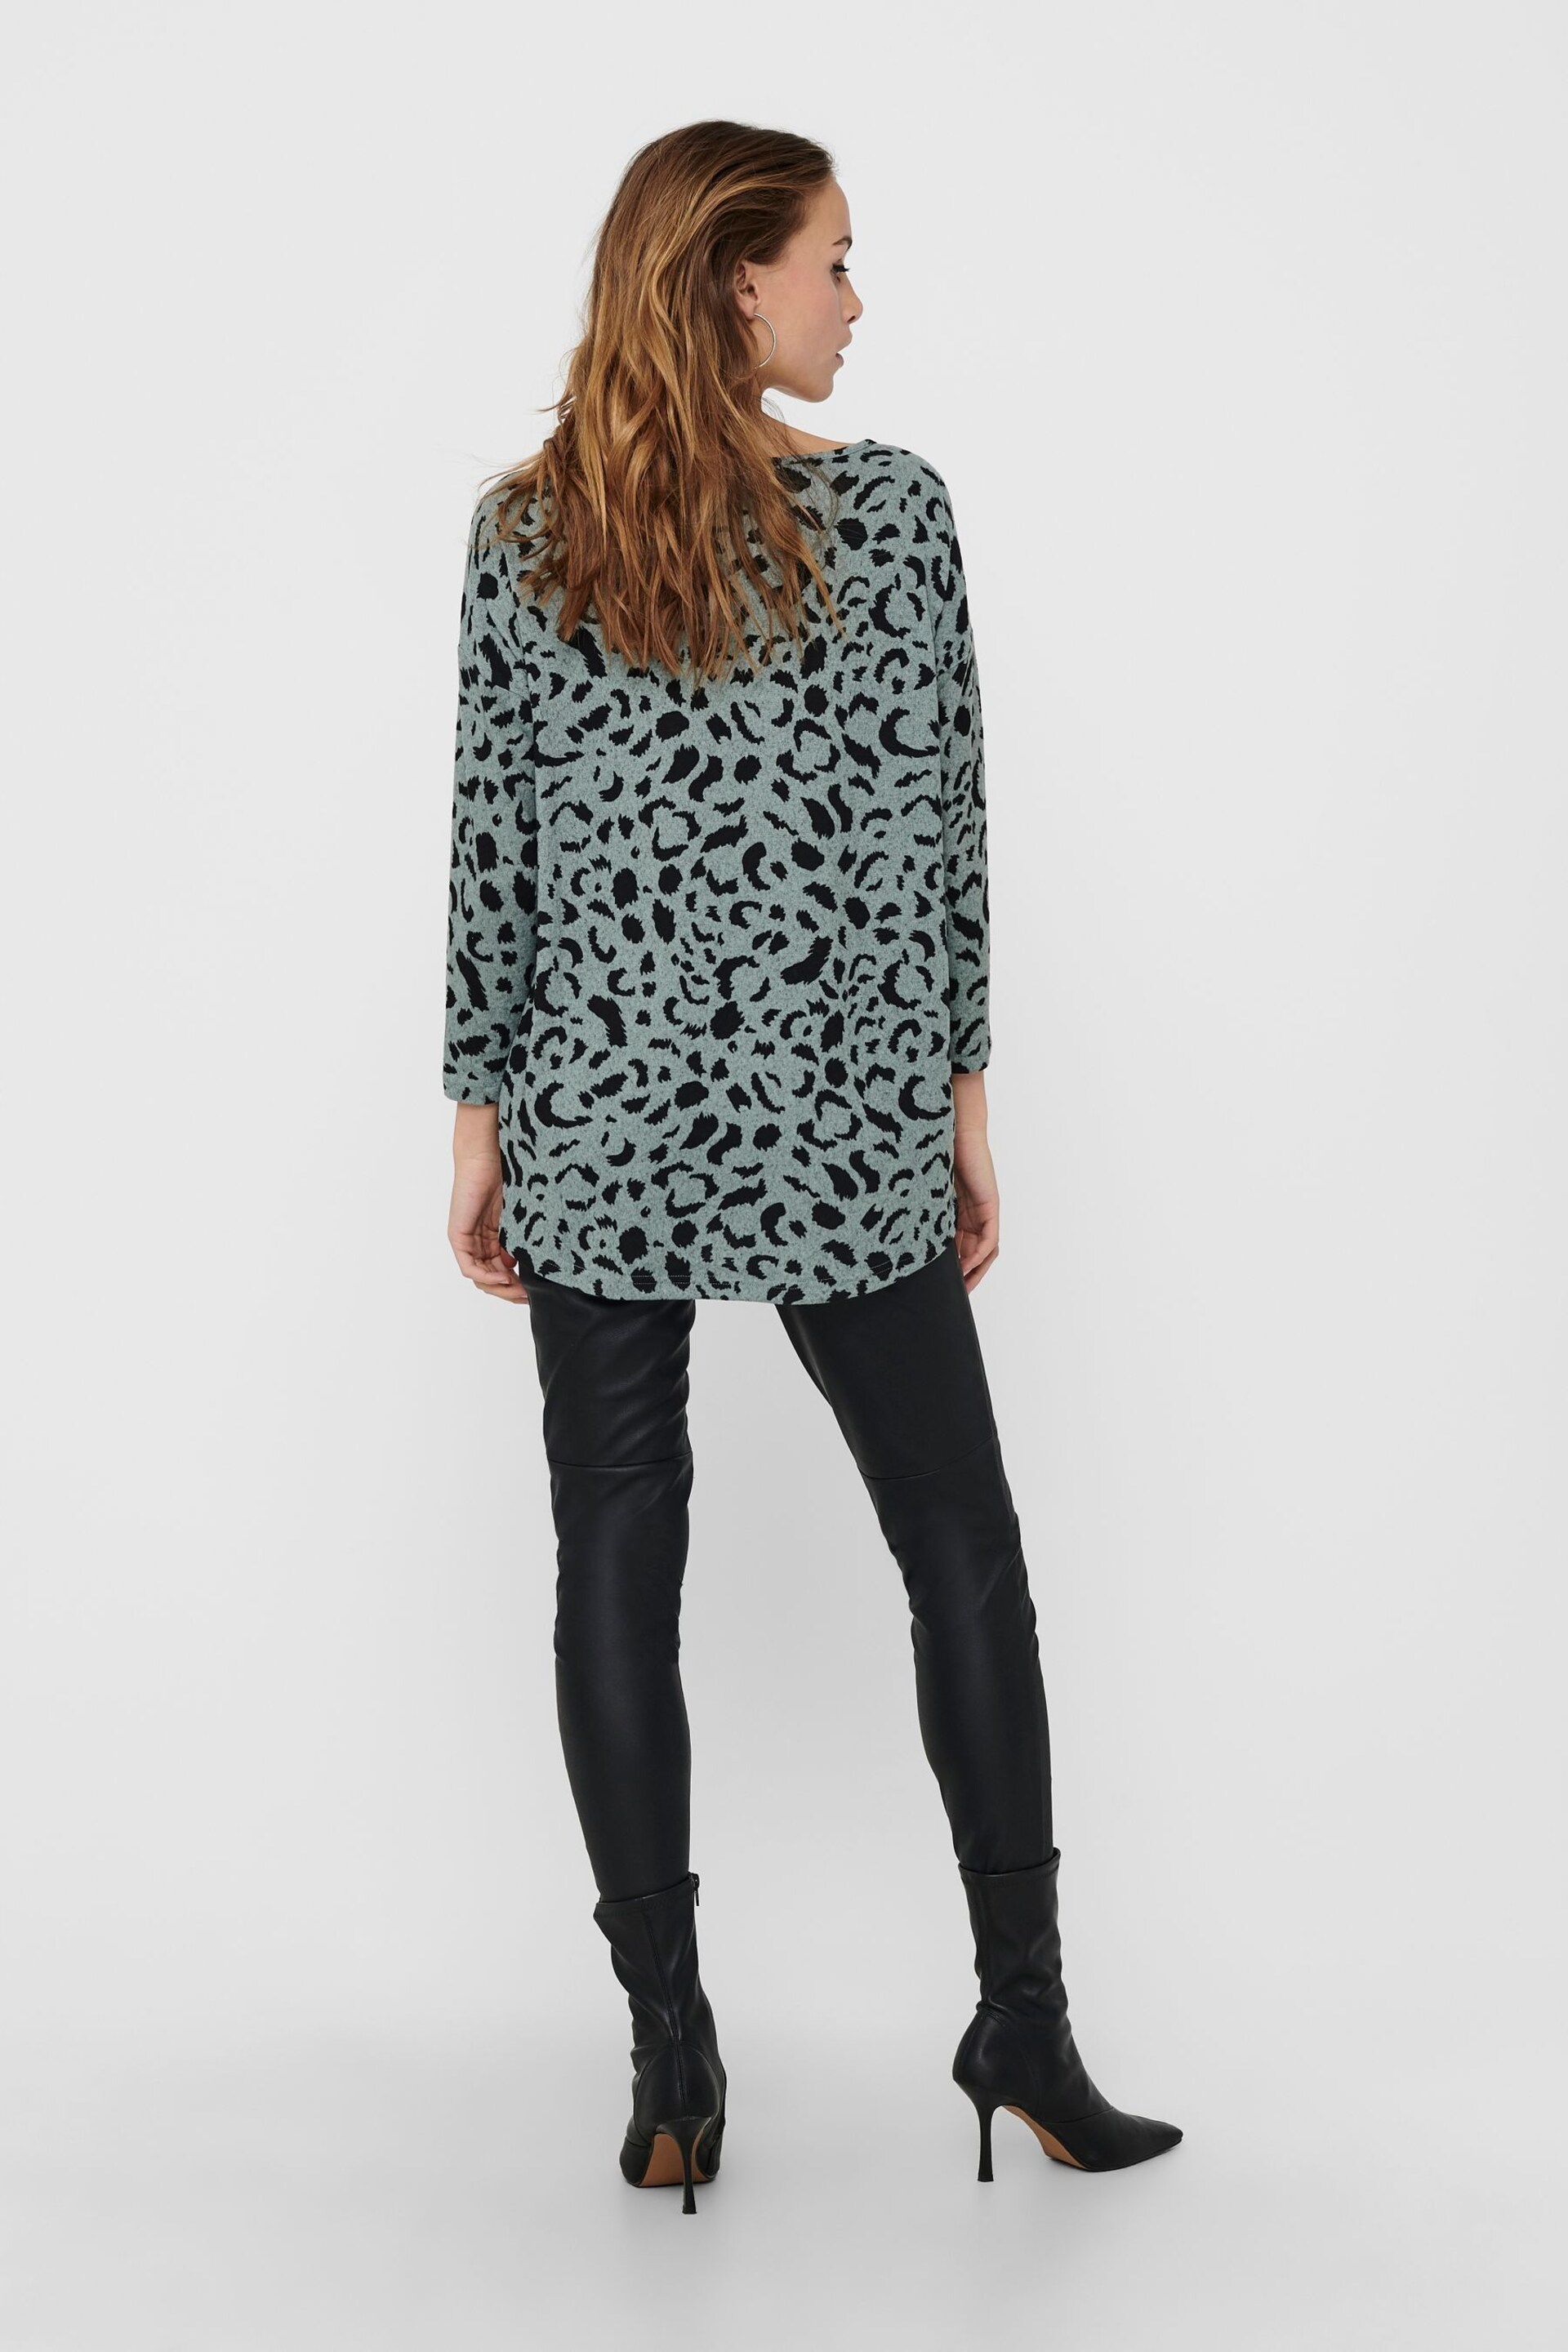 ONLY Green Lightweight Knit Printed Jumper - Image 2 of 5